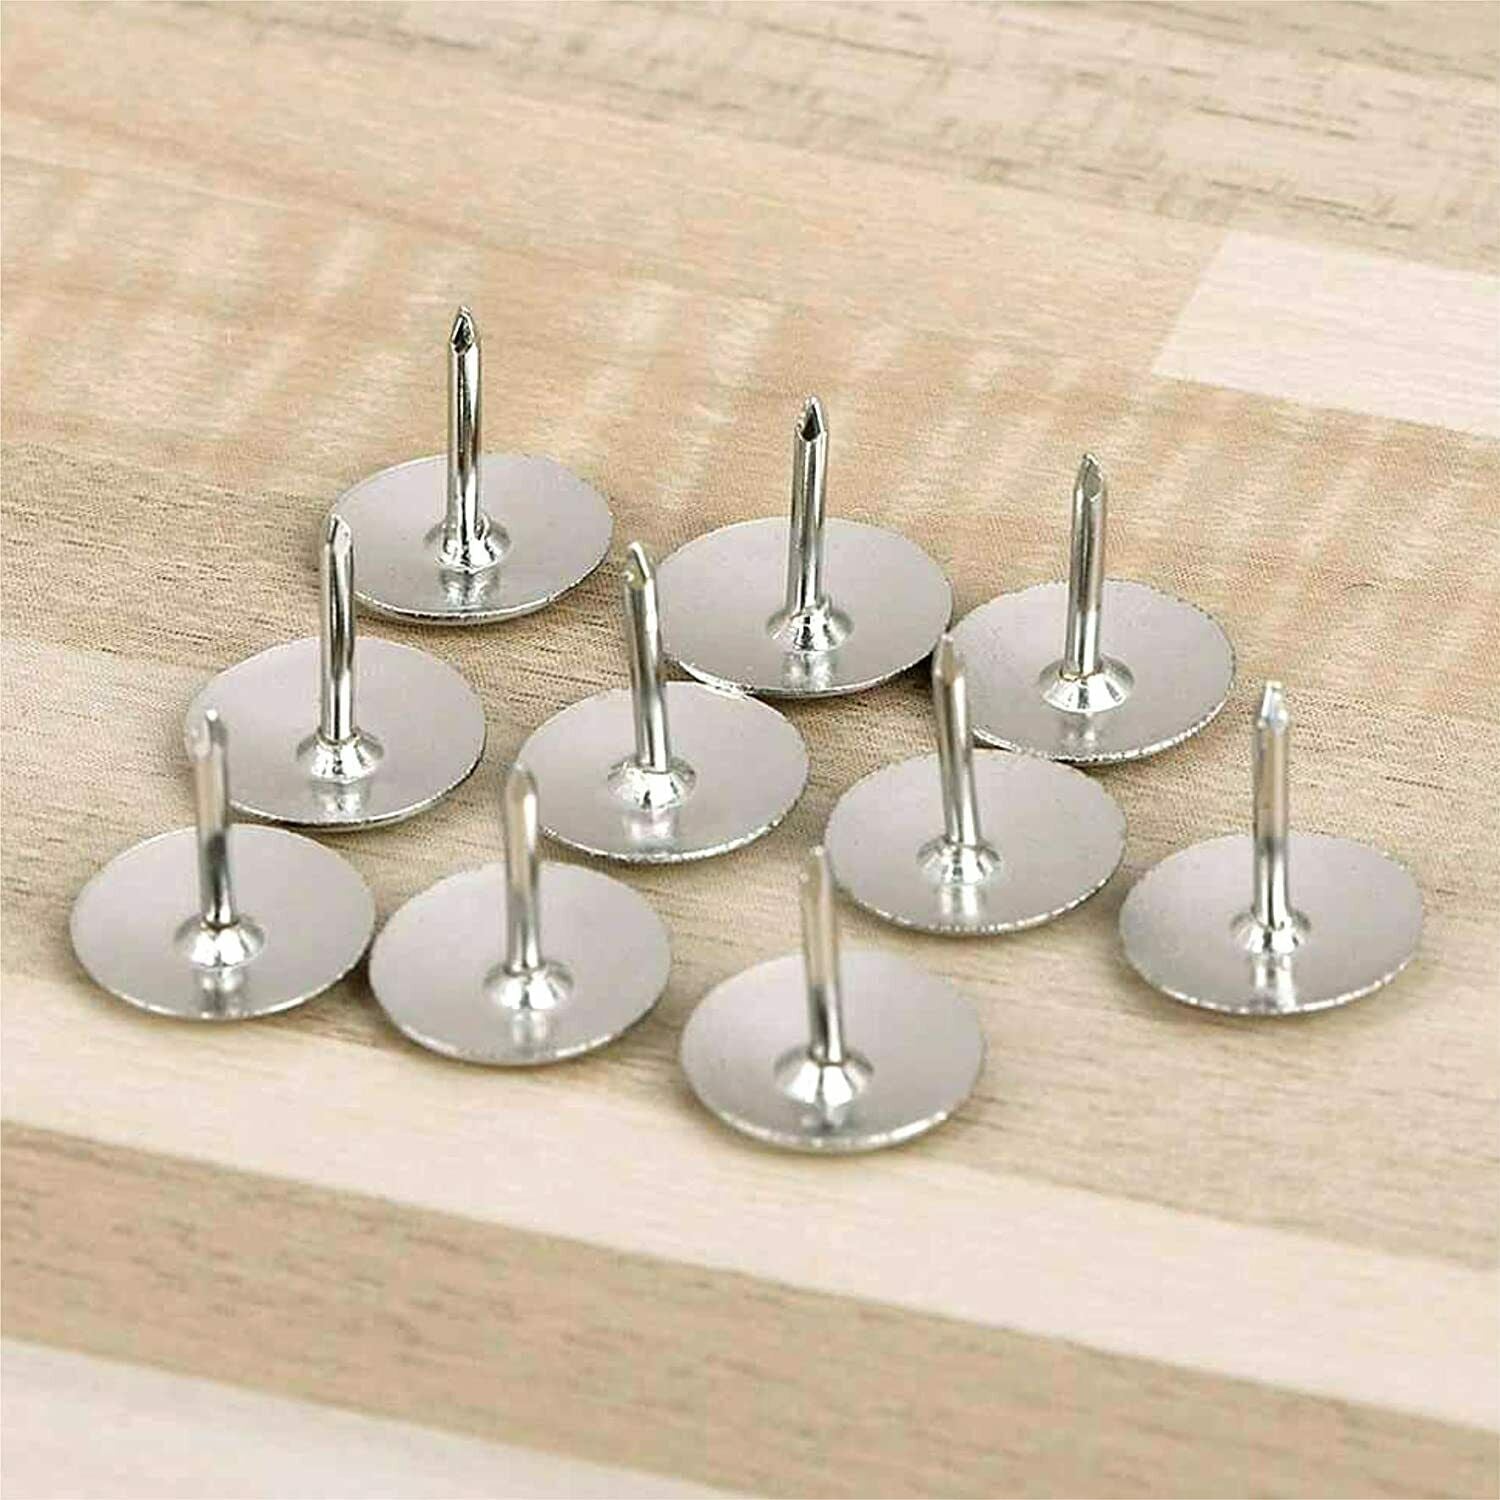 Grtard Steel Thumb Tacks 300 Pack, Silver Round Head Pins Office